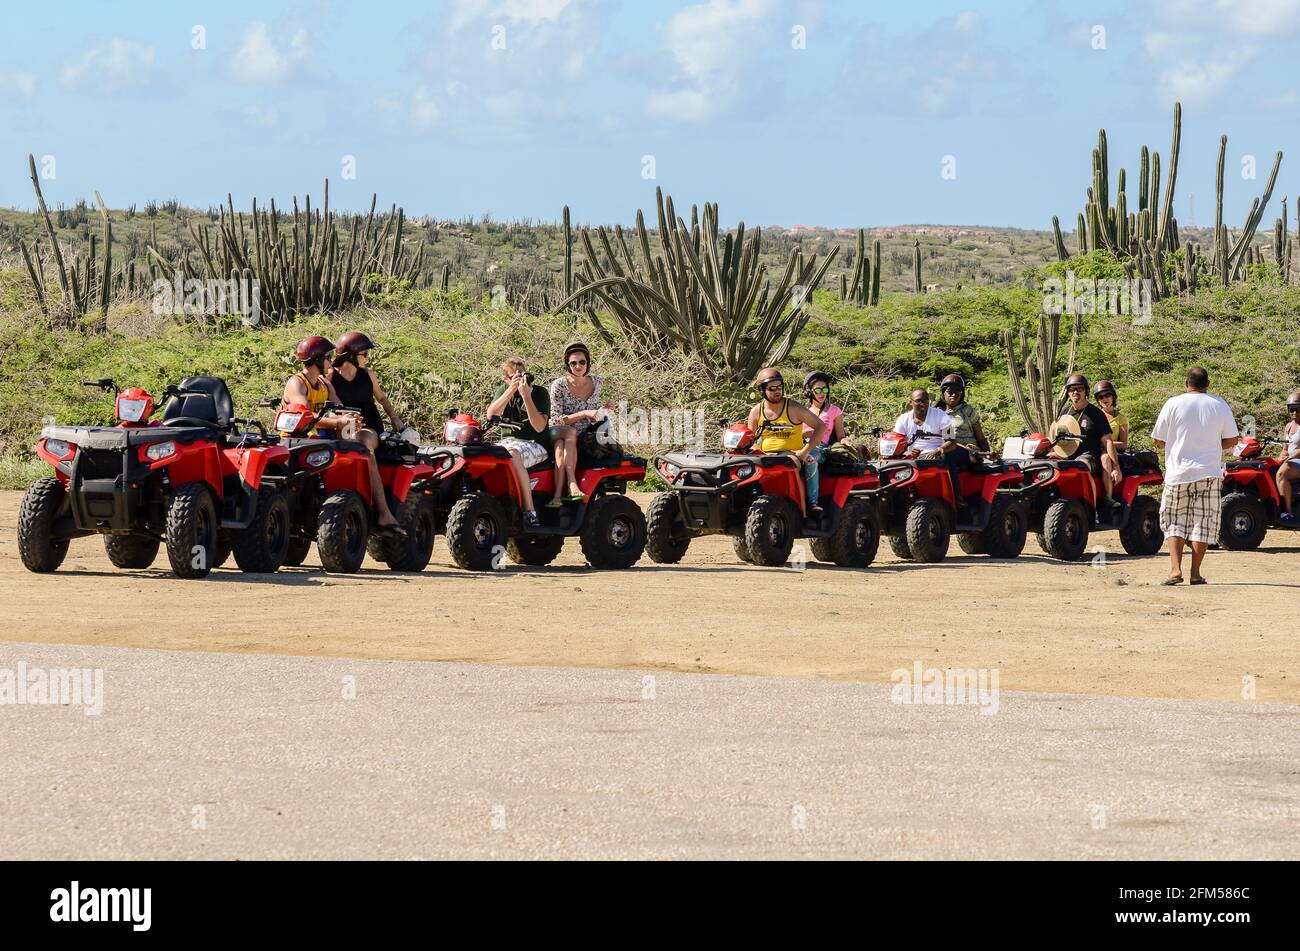 Group of people having a guided tour by some quads with some cacti in the background in Aruba Stock Photo